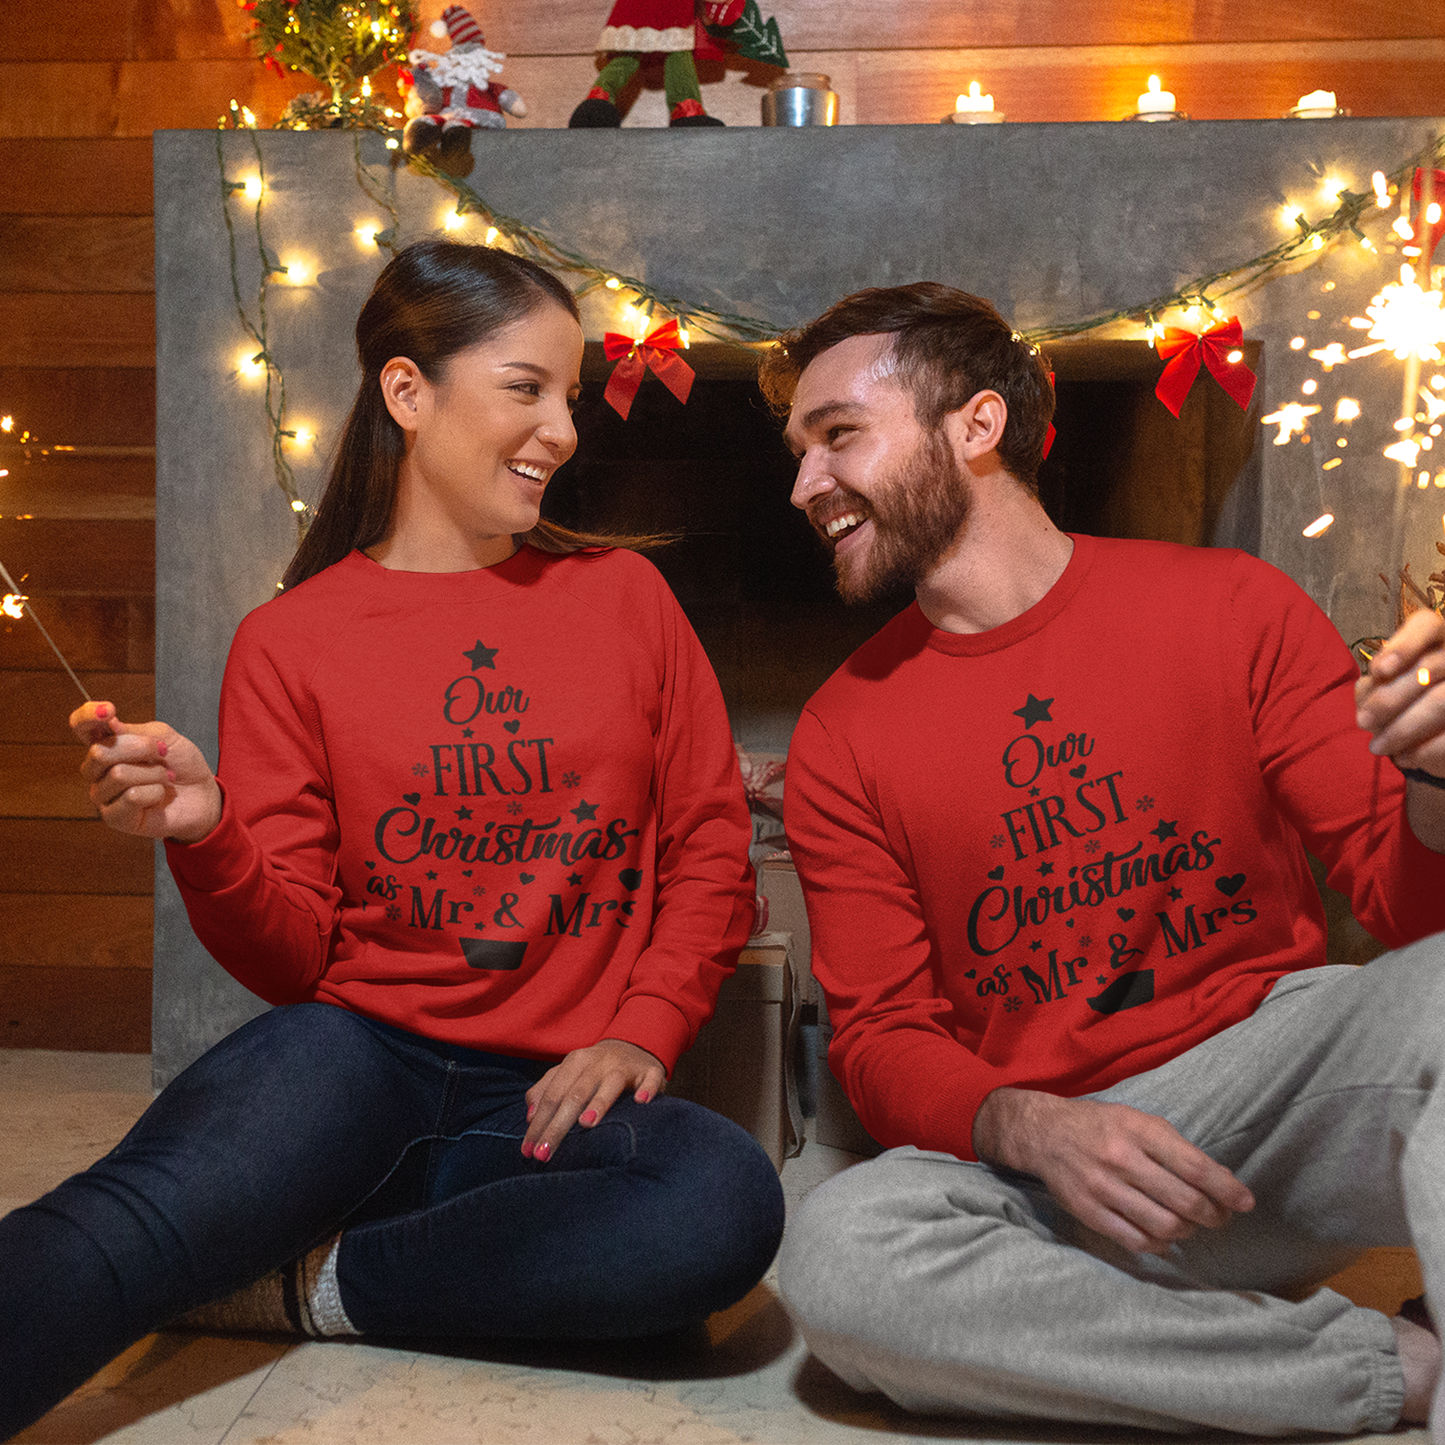 Our First Christmas as Mr & Mrs red Sweatshirt -Husband and Wife